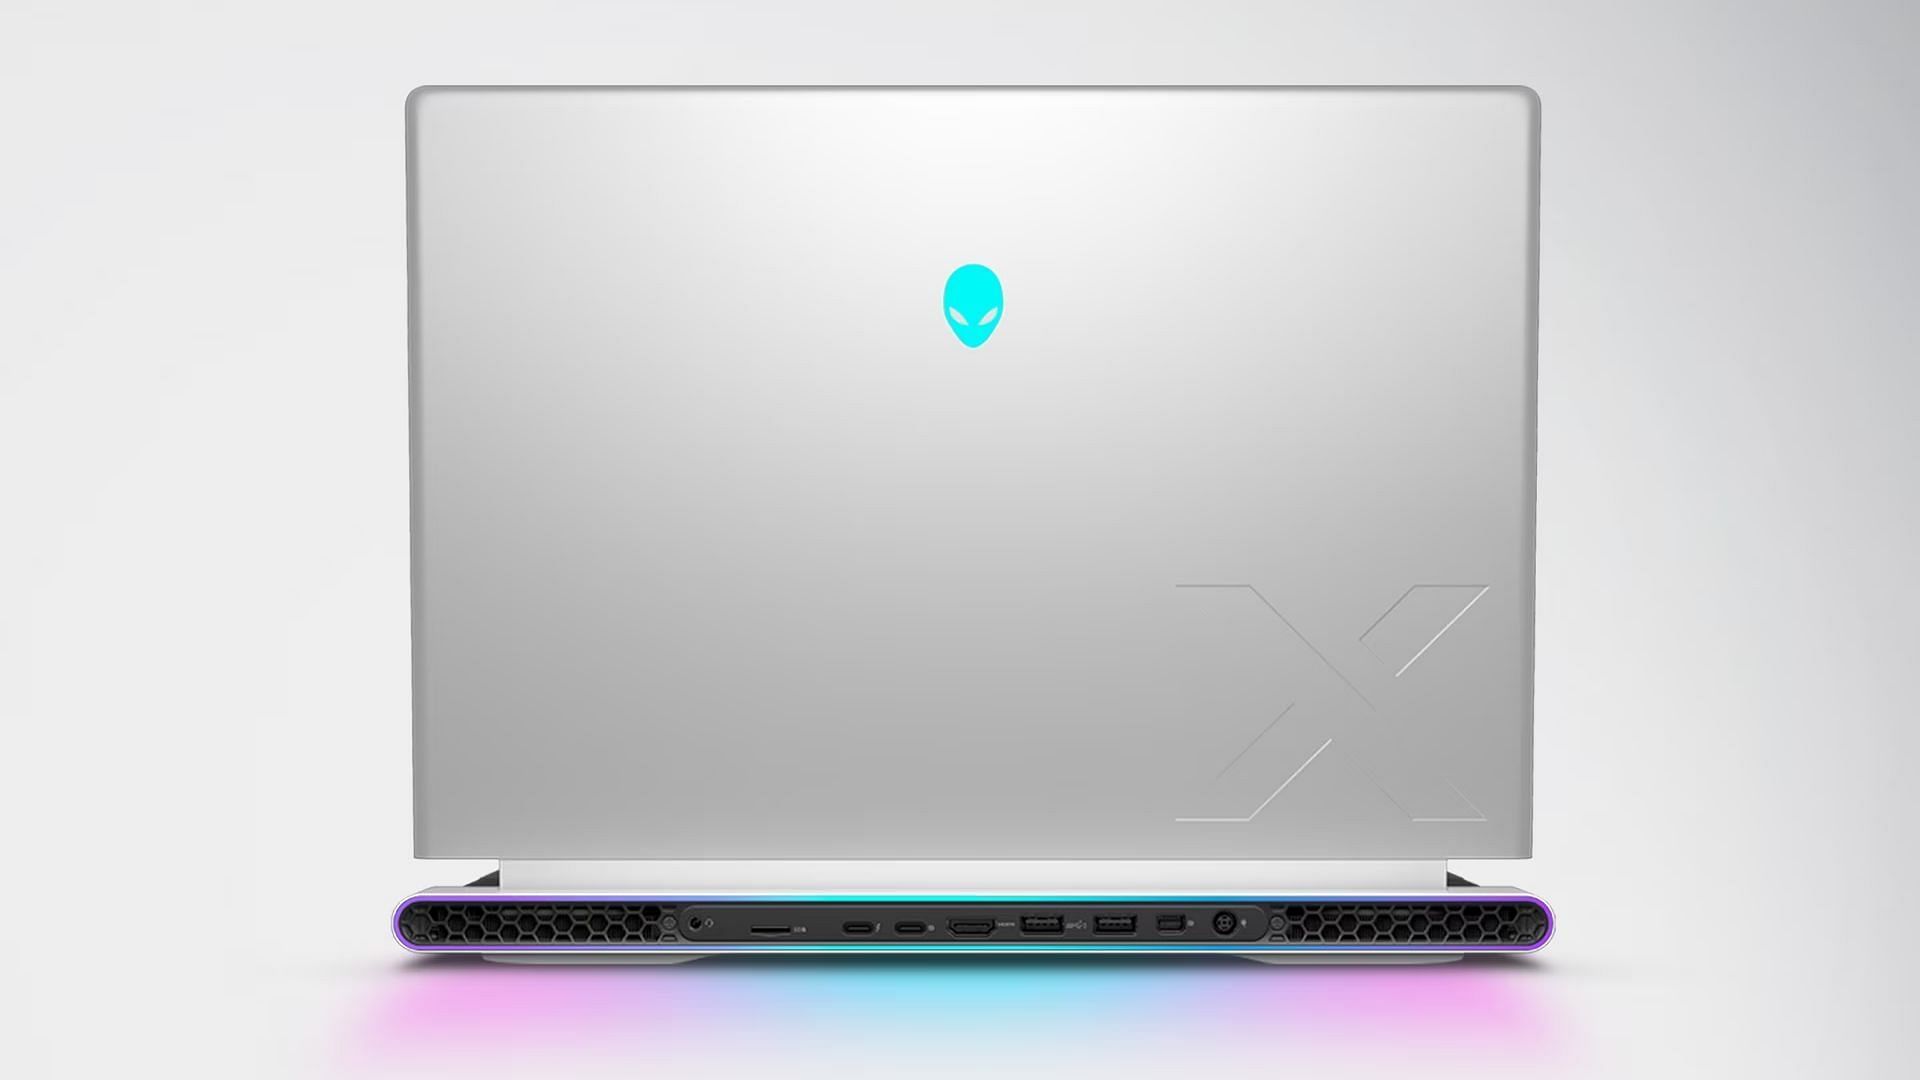 Alienware laptops come with classy look (Image via Dell)